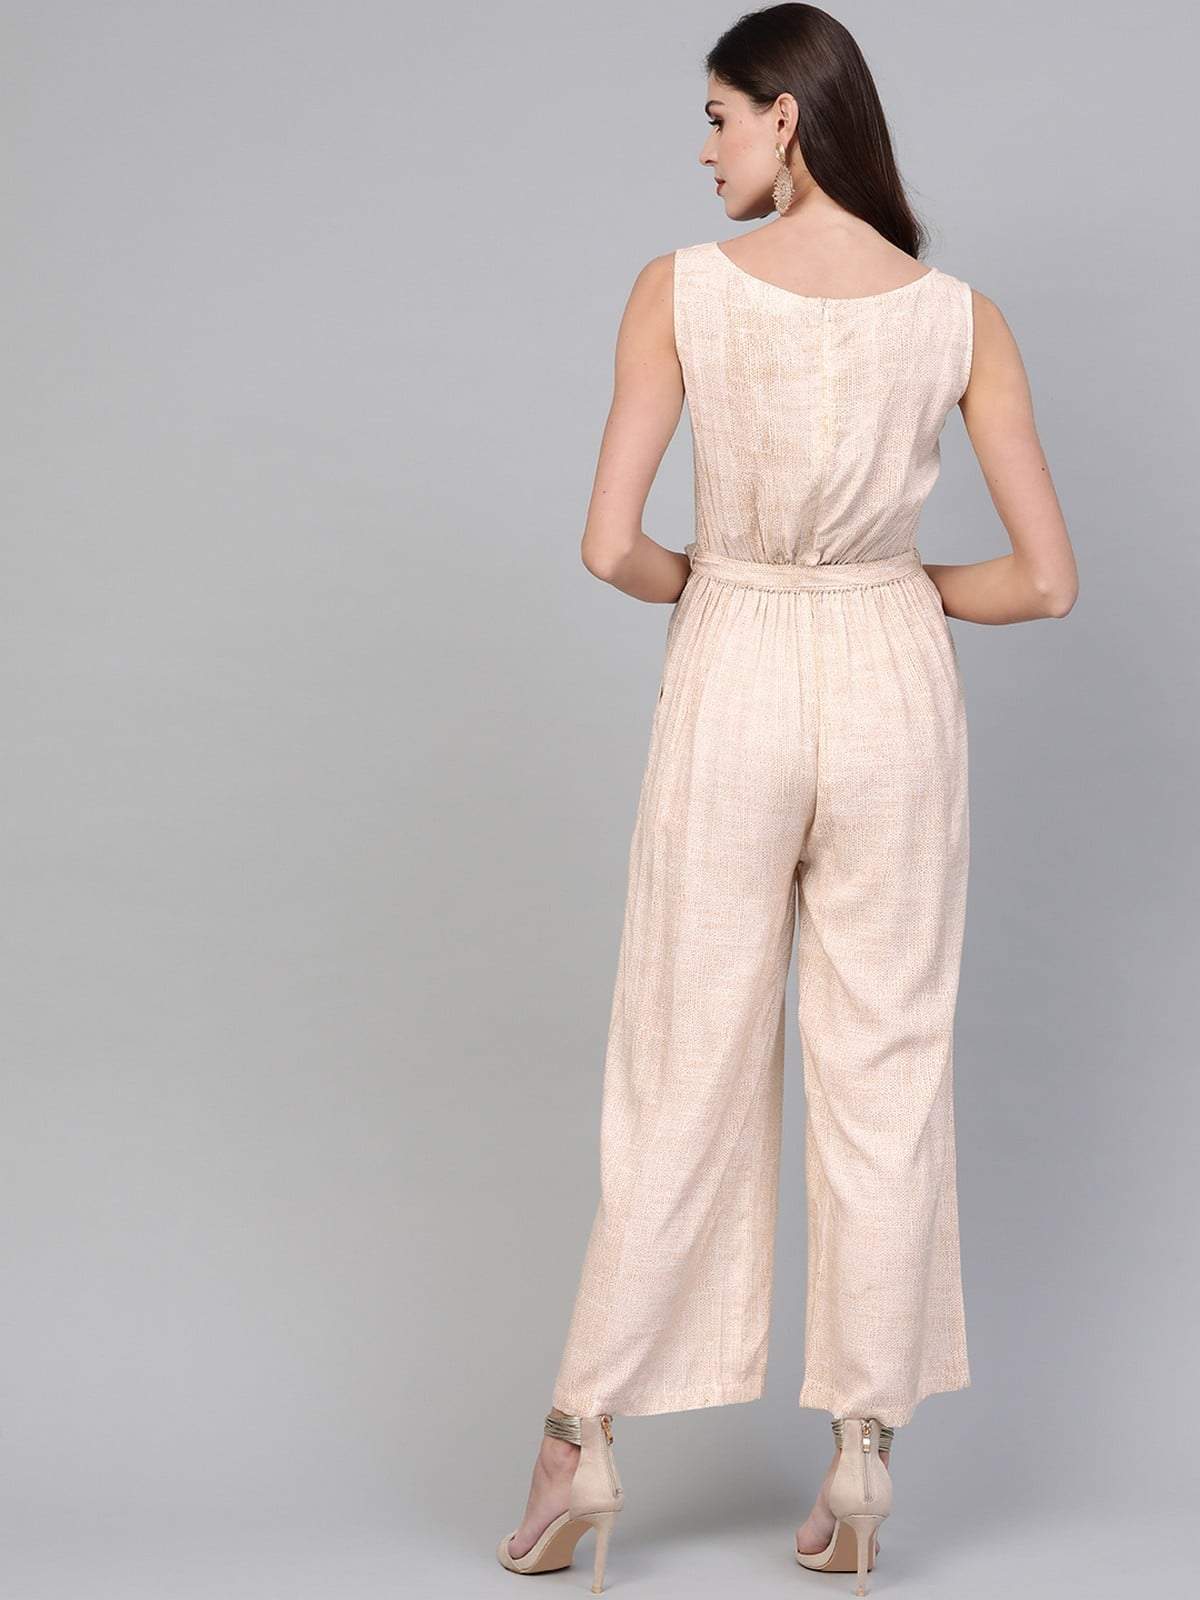 Women's Allover Printed Jumpsuit With Embroidery - Pannkh